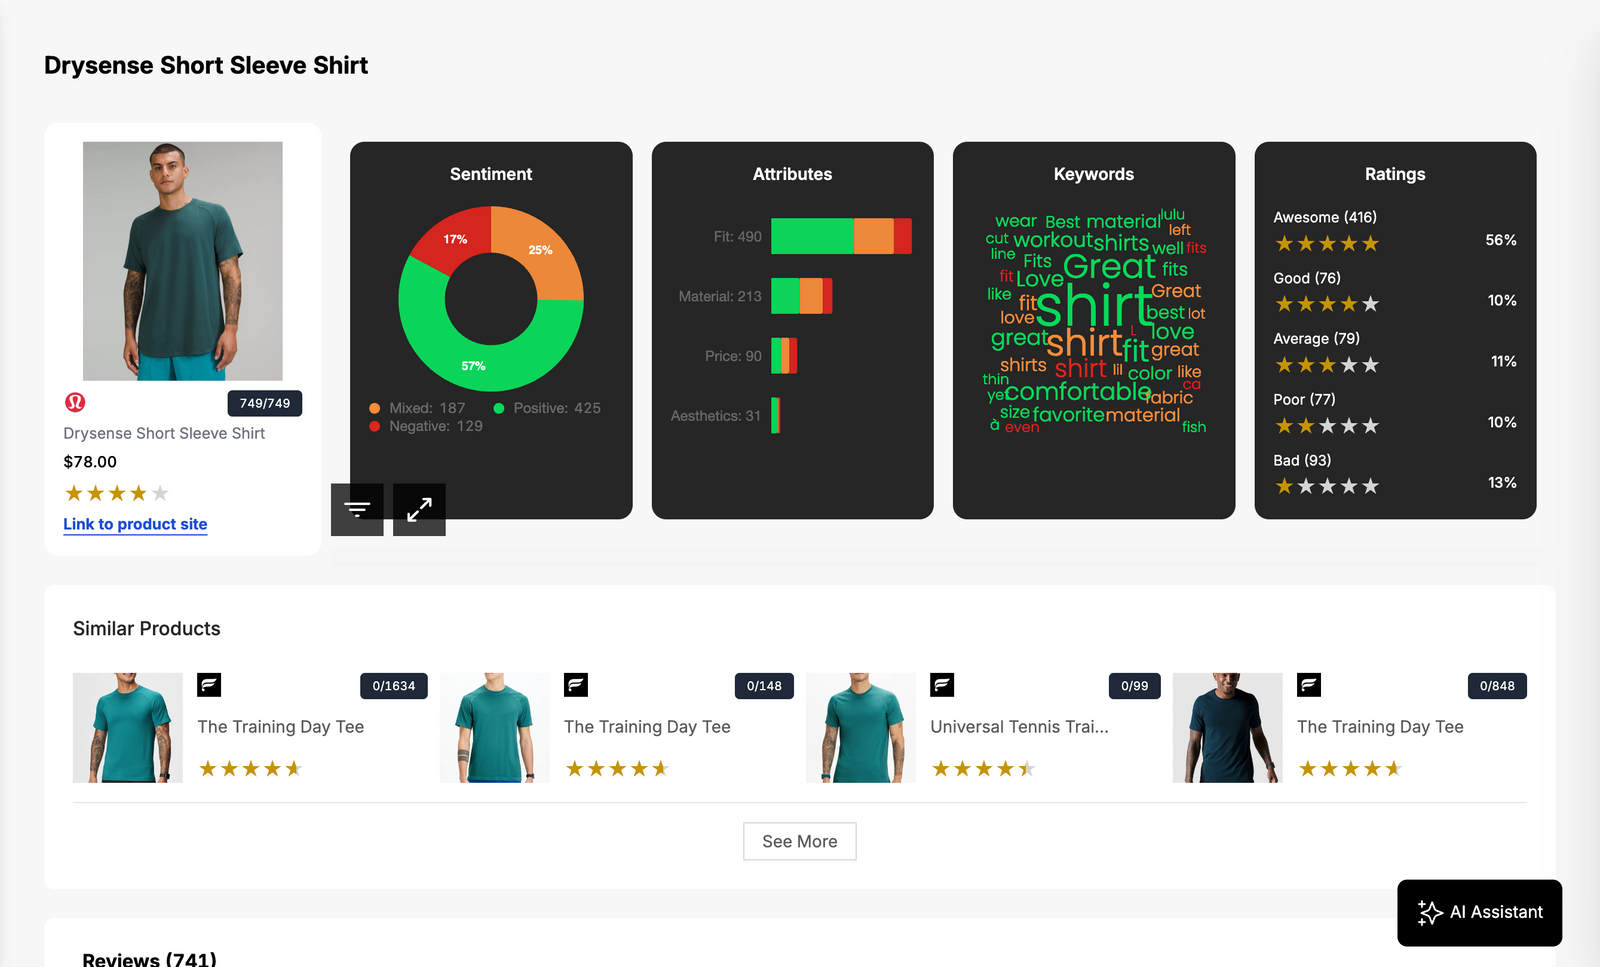 Woven Insights' Consumer Insights dashboard, showing product sentiment, attribute and ratings insights for a shirt.